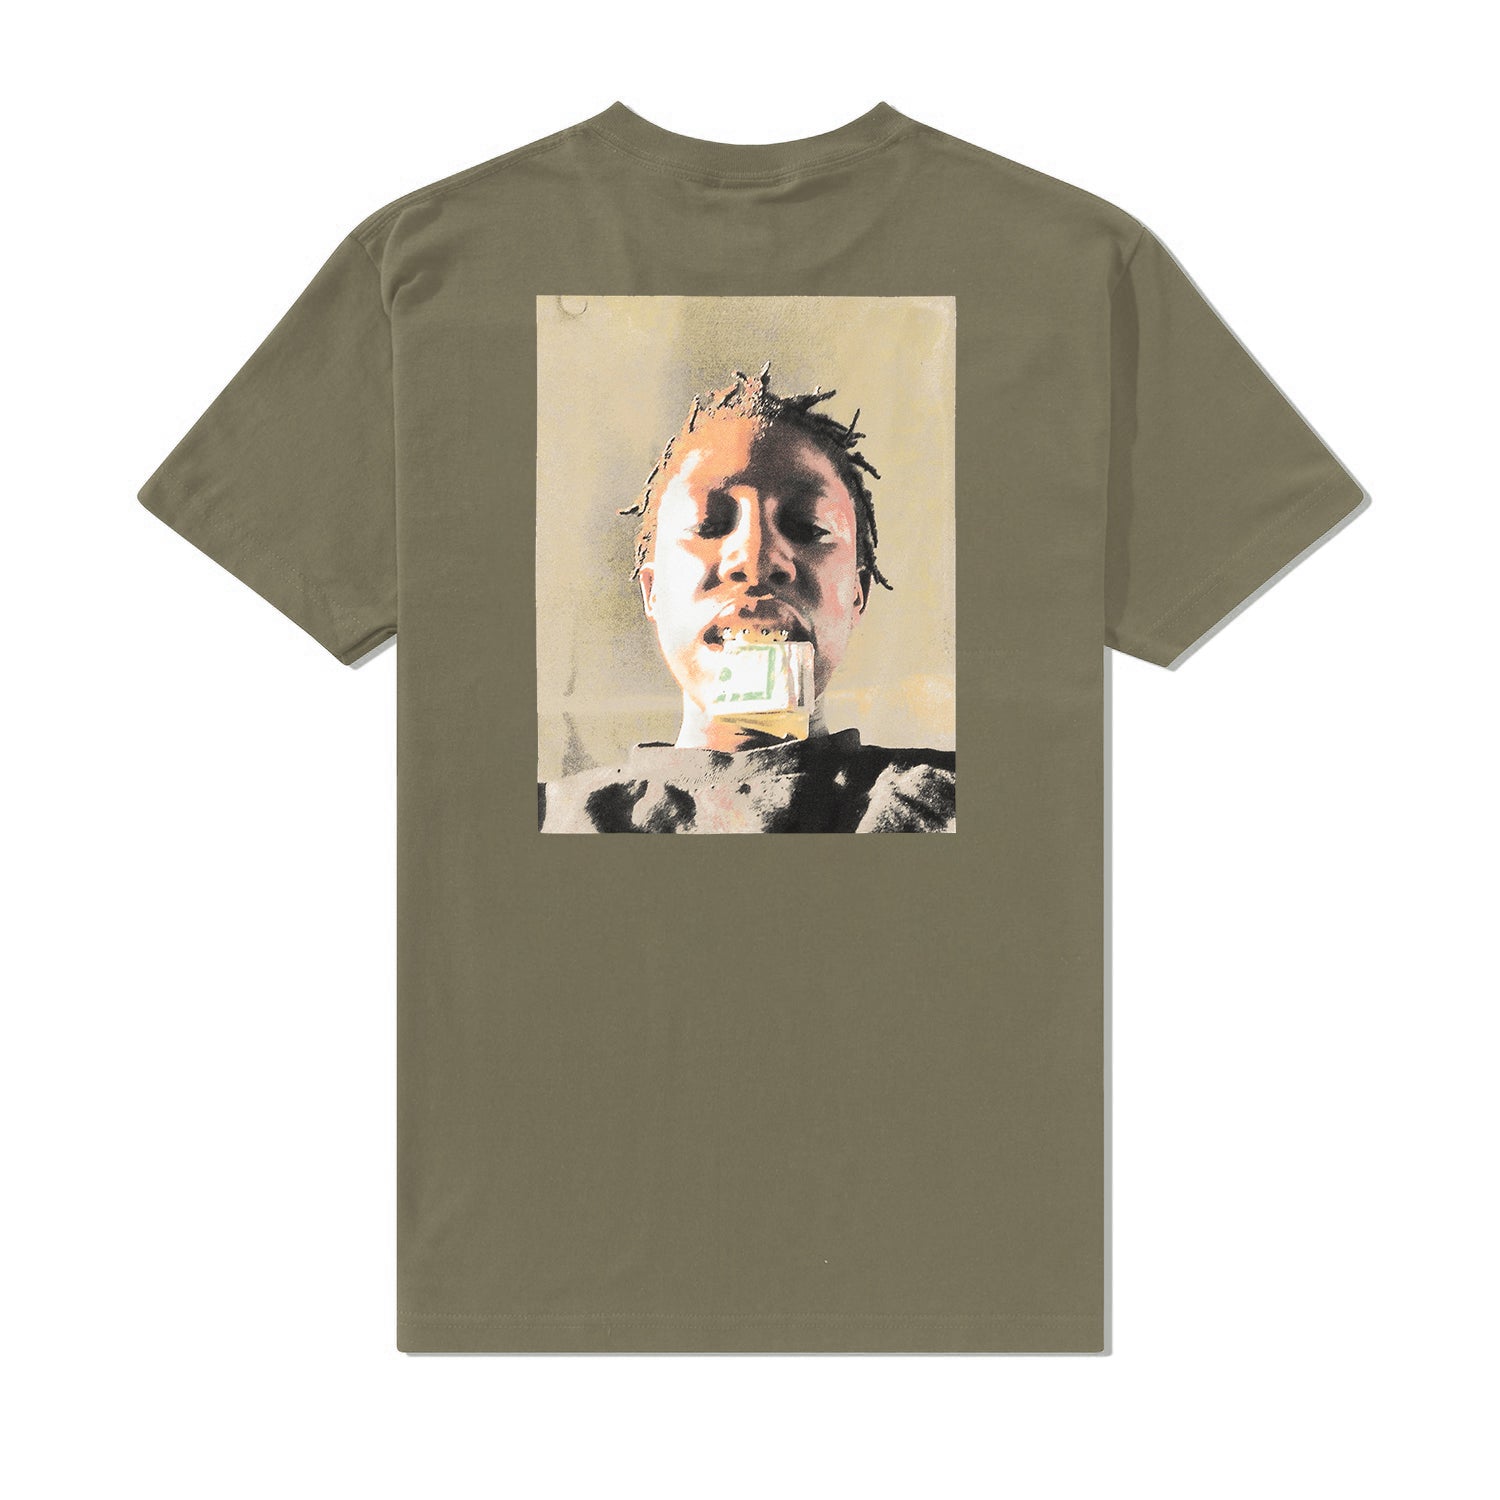 Kader 'Put Your Money Where Your Mouth Is' Tee, Olive